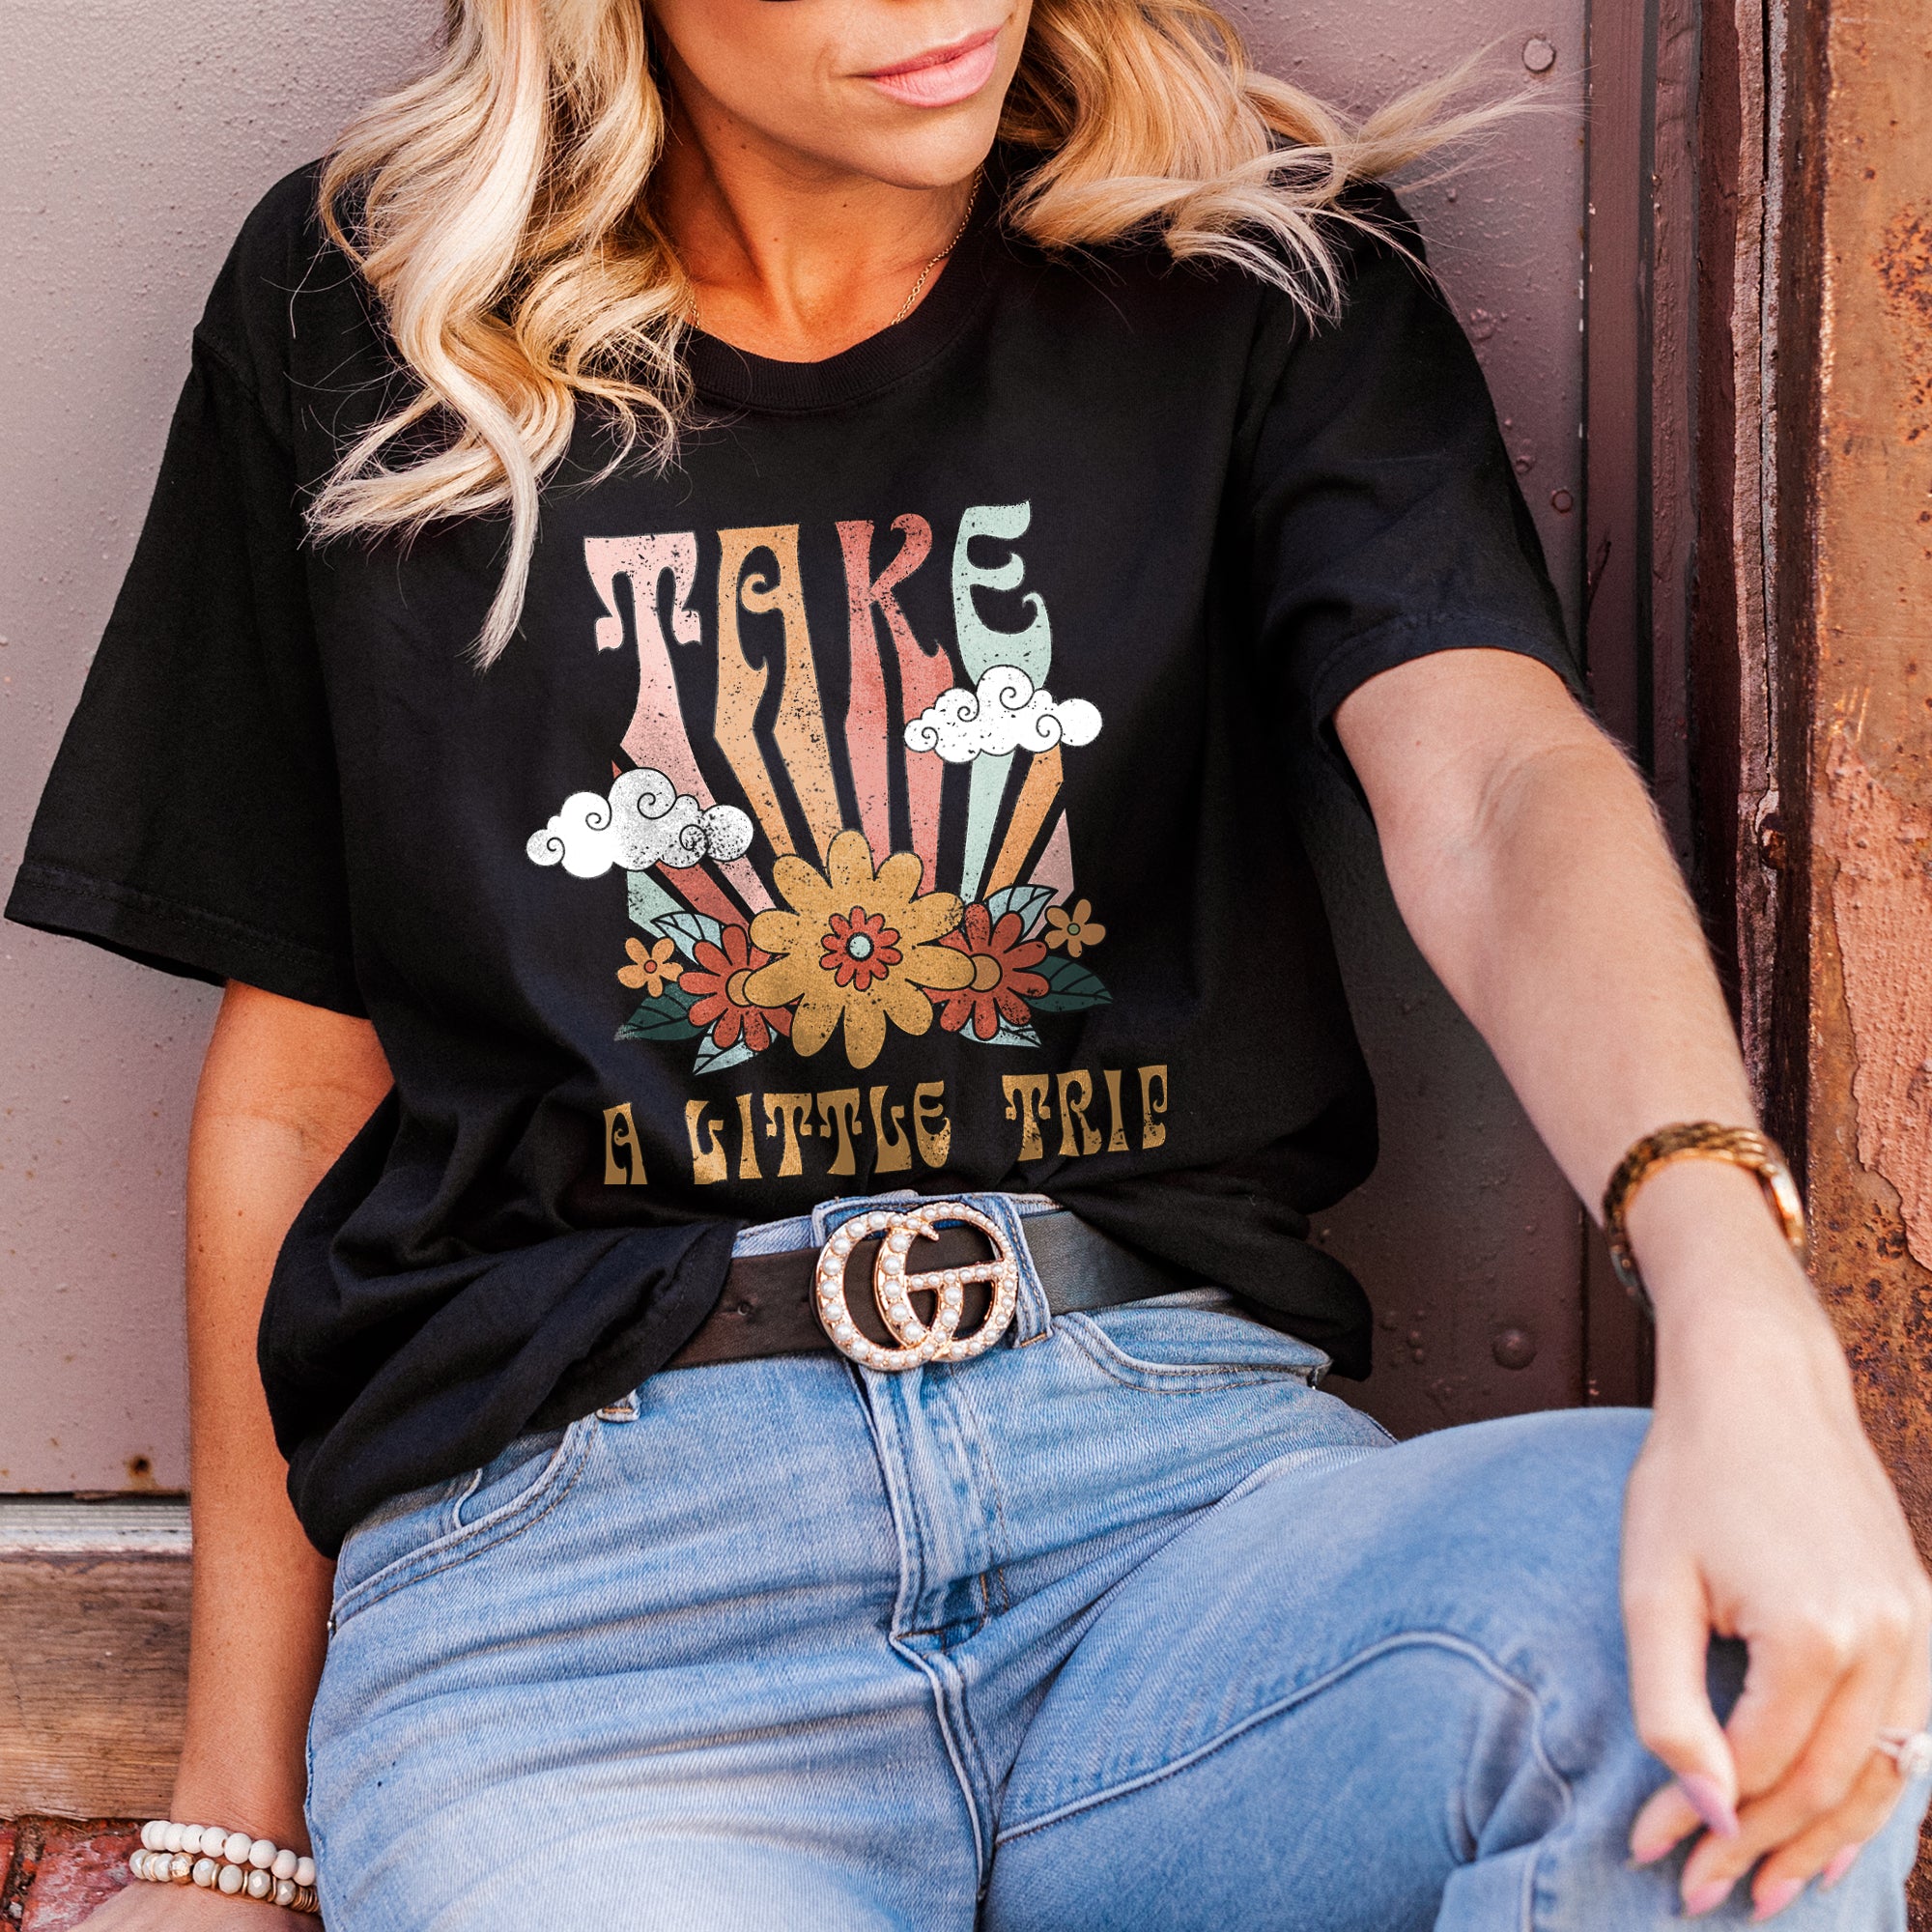 Take A Little Trip Oversized Shirt for Women & Men Garment-Dyed Graphic Tee